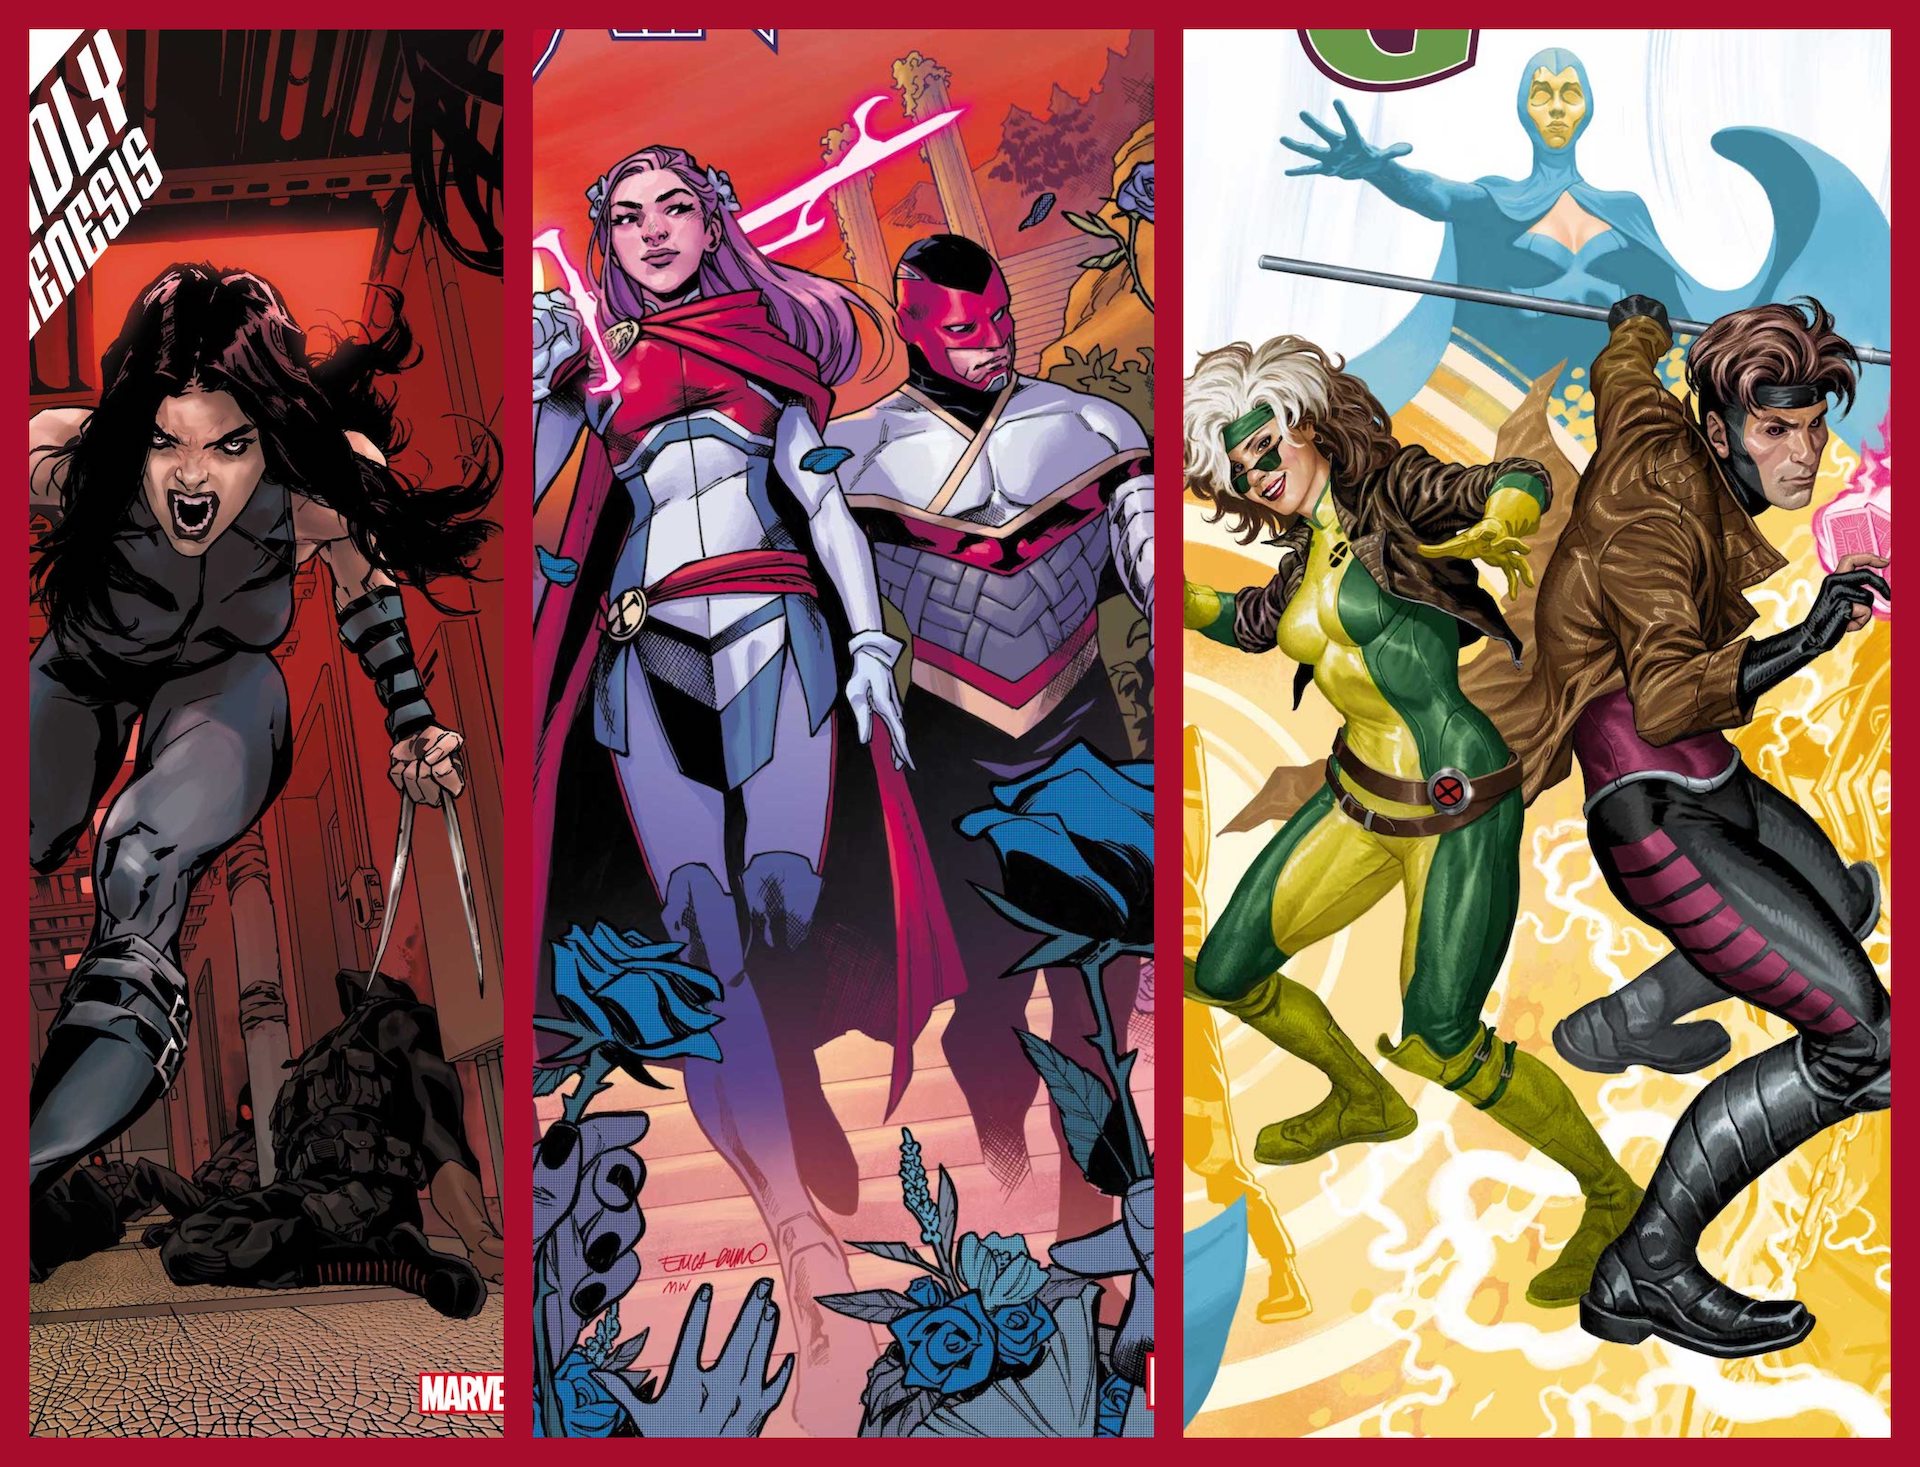 NYCC 2022: Women of Marvel panel unveils X-Men titles like 'X-23,' 'Rogue & Gambit,' and more